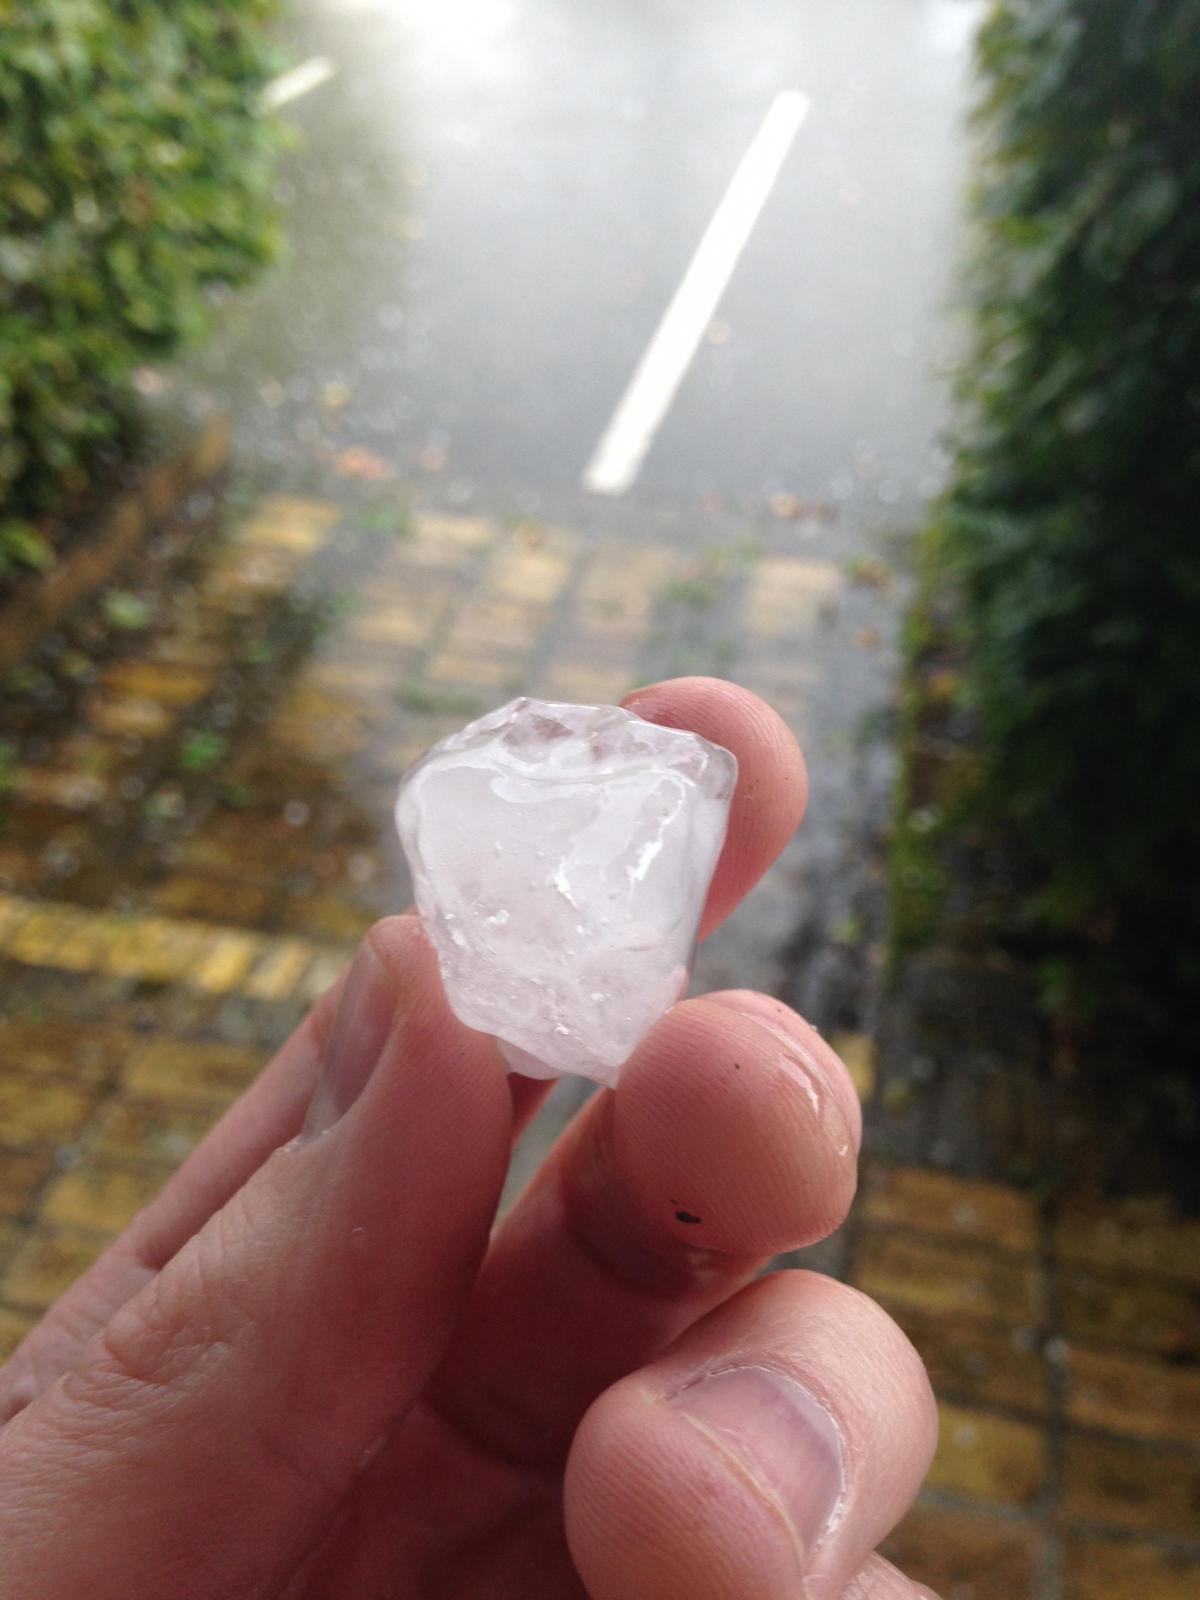 A hailstone that pelted down outside the Oxford Mail offices